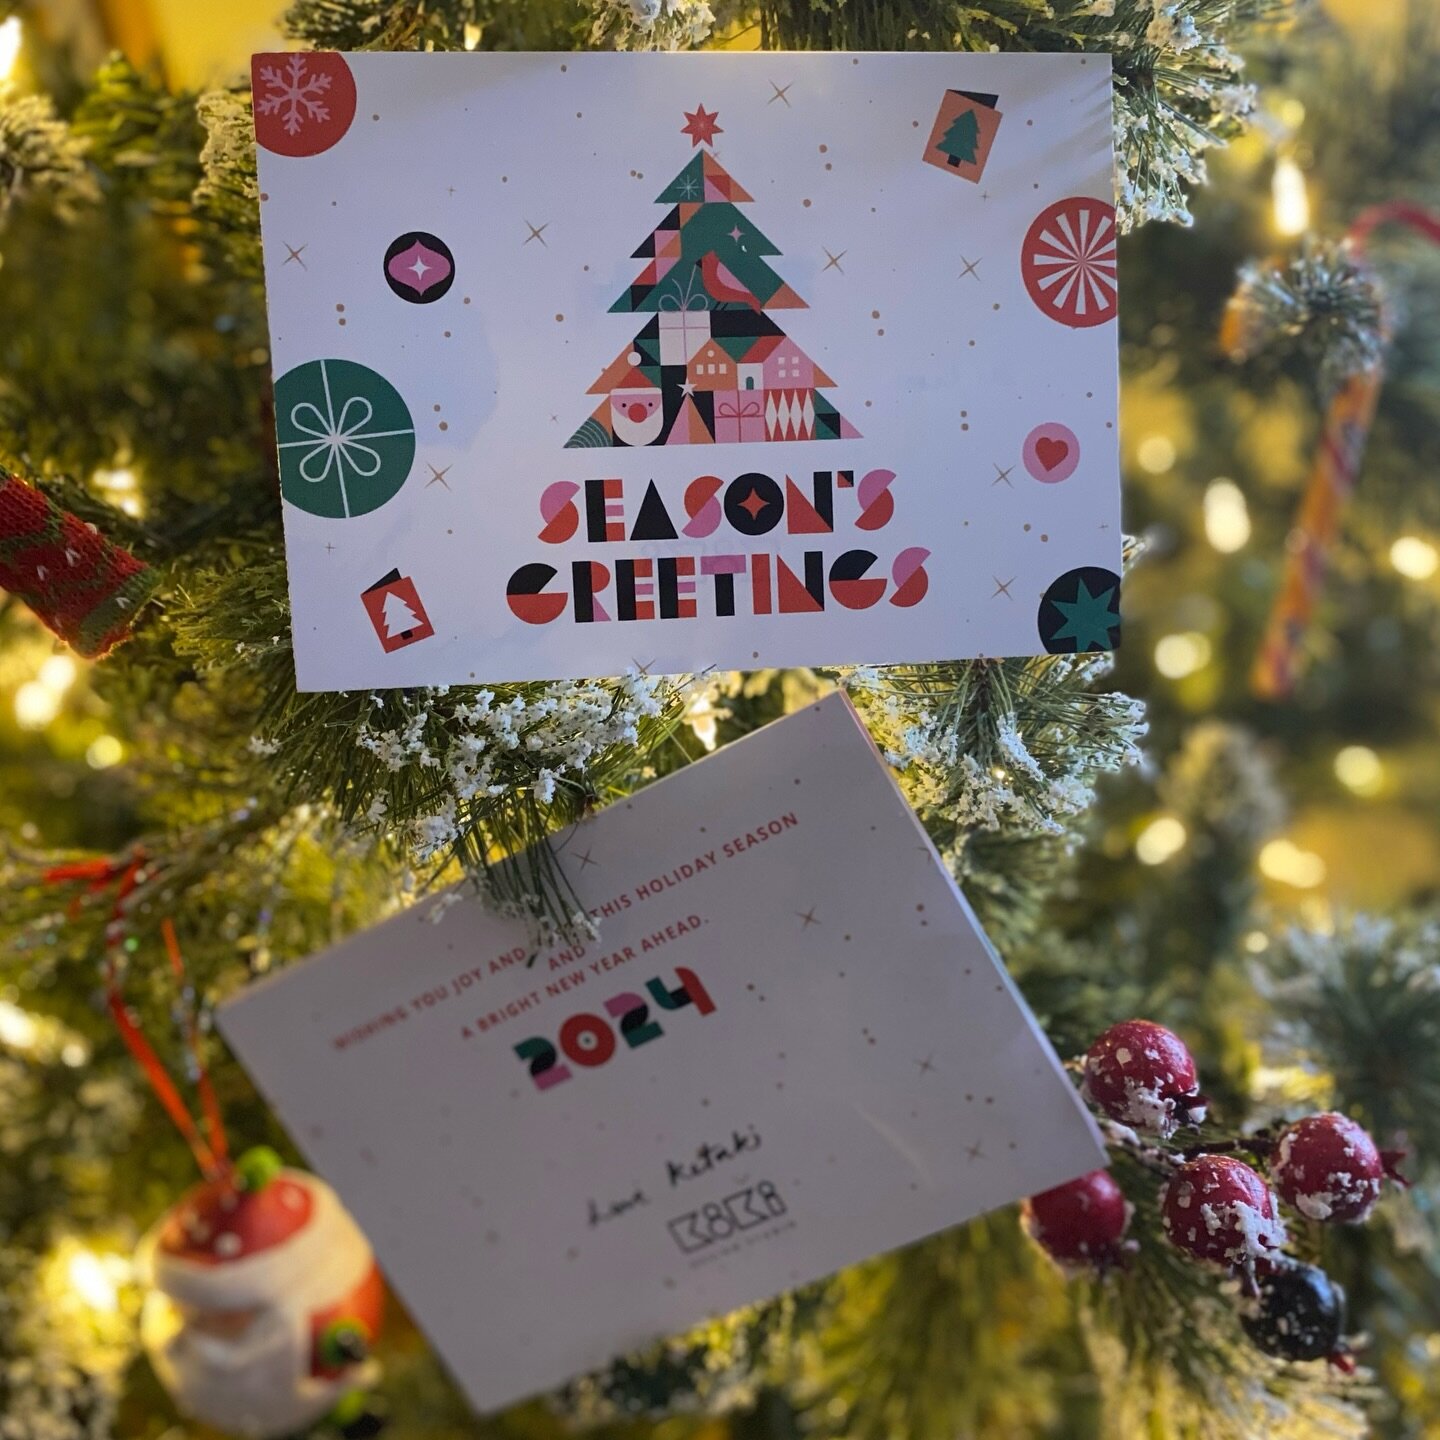 It's that magical Holly Jolly season!🎄📬

Spreading cheer and gratitude with these holiday cards, designed with love by yours truly. 💌

It's been an absolute joy having you in both my real and virtual worlds!🥰

#StudioK8Ki #SeasonsGreetings